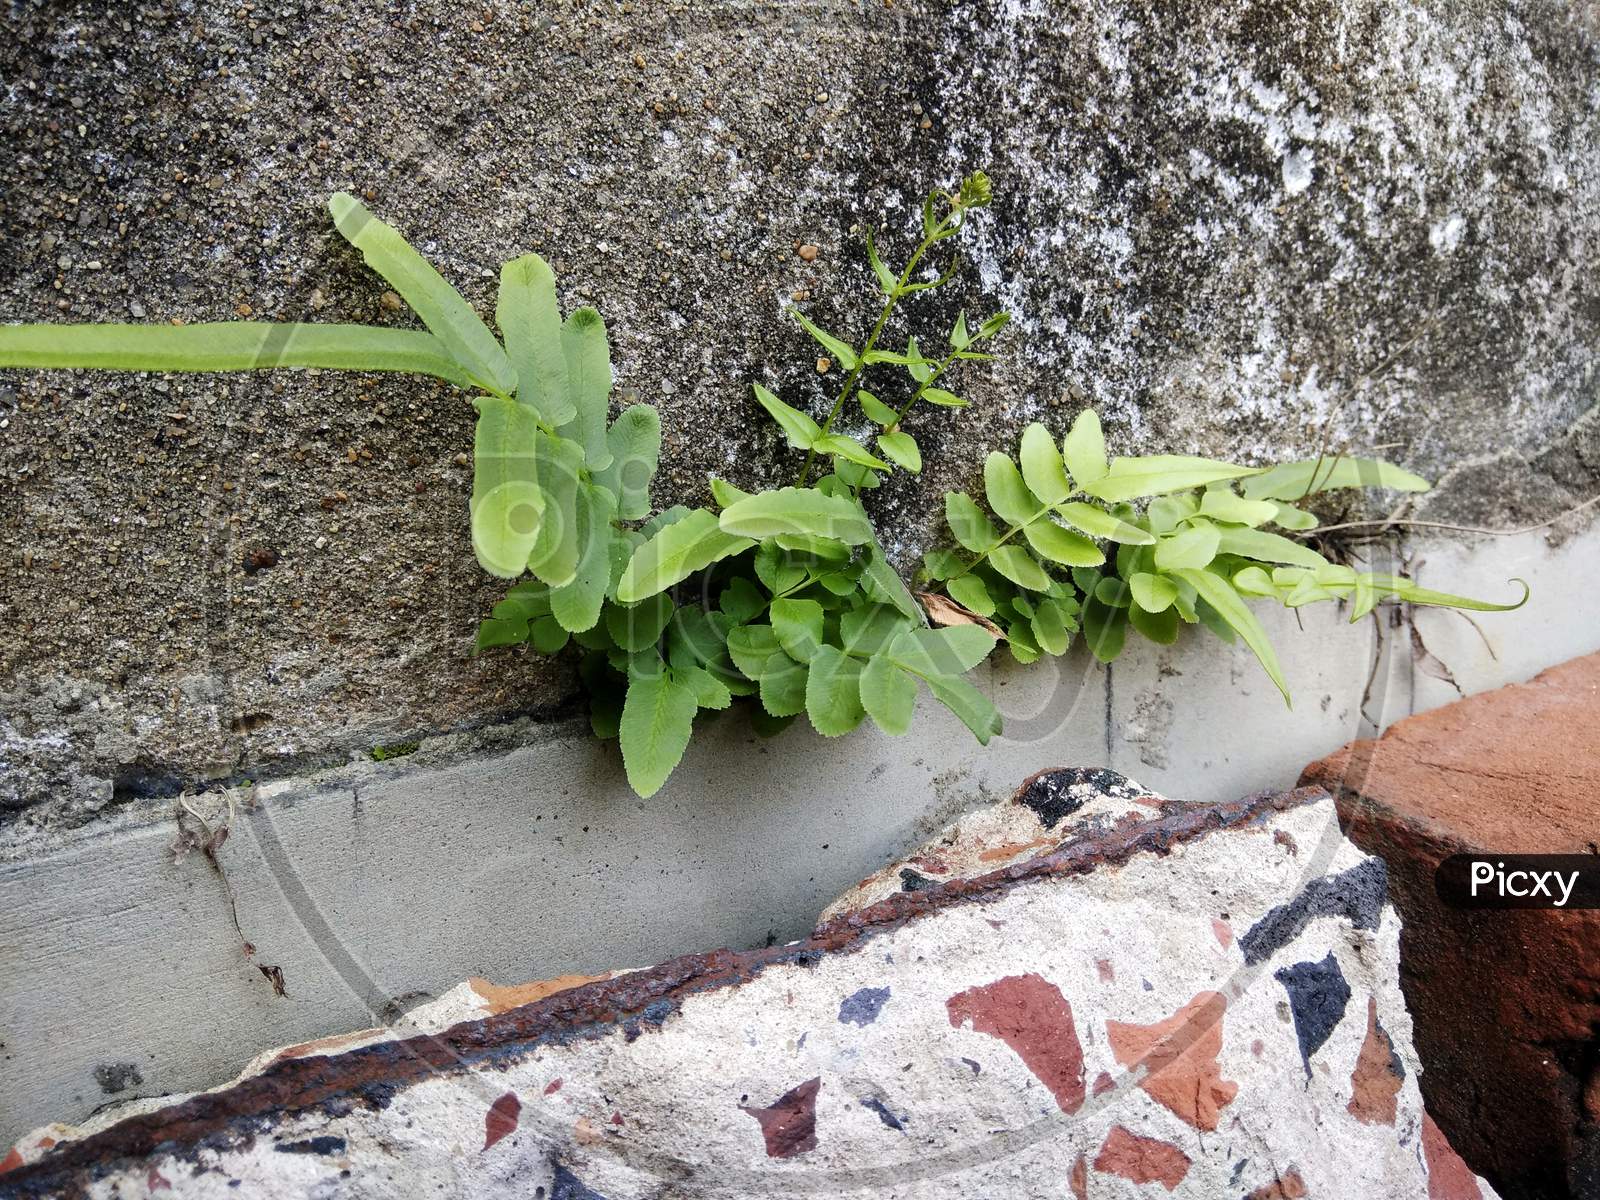 Fern sprouting from a crack of a wall. Nephrolepis exaltata, known as the sword fern or Boston fern, is a species of fern in the family Lomariopsidaceae native to tropical regions throughout the world